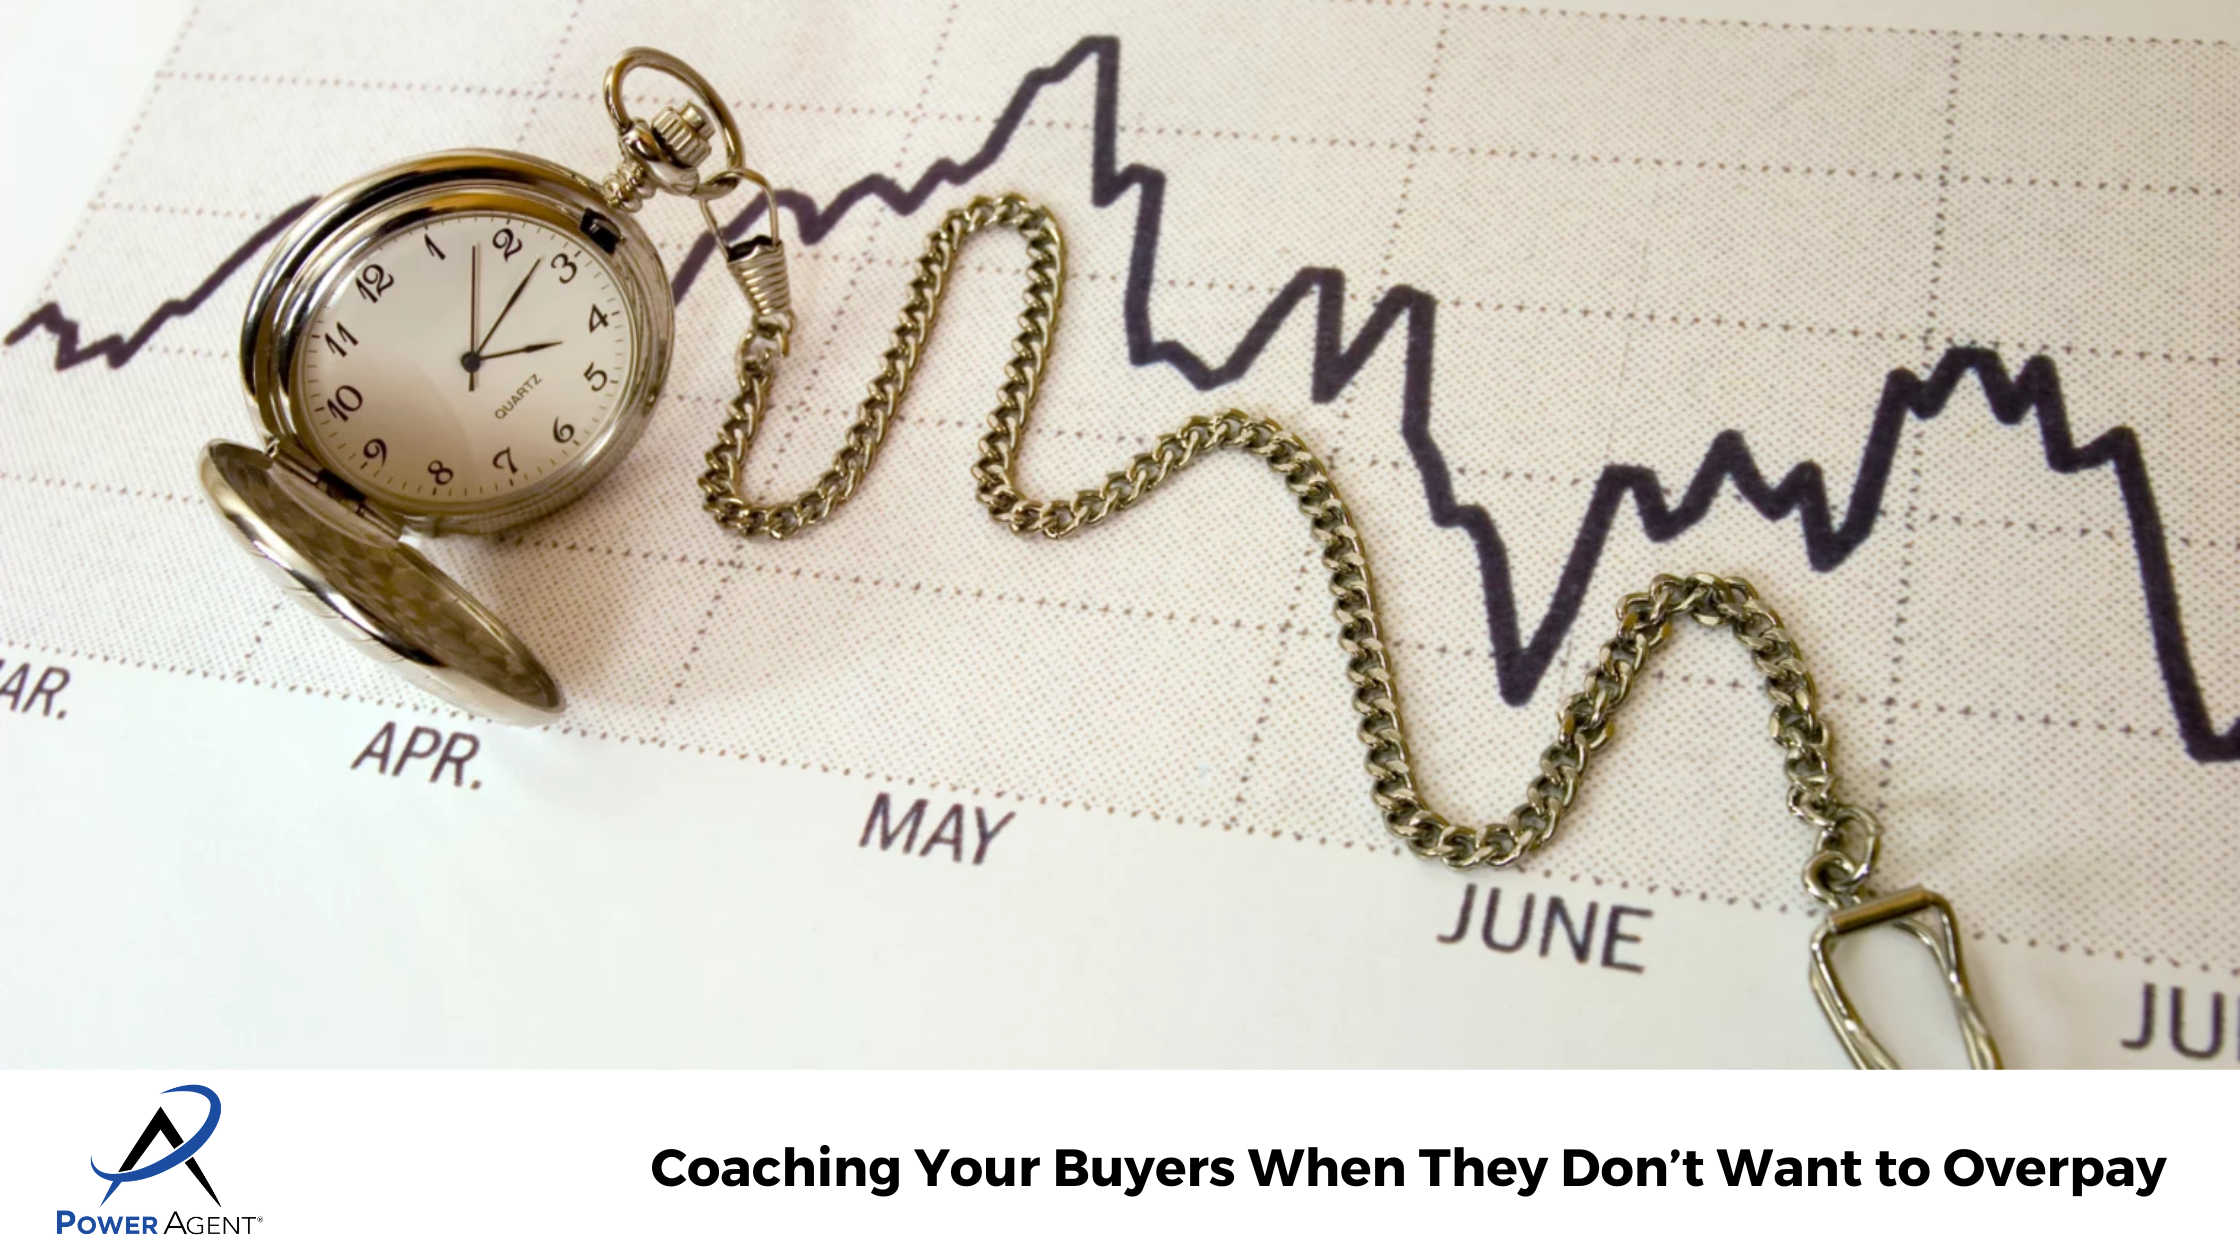 Coaching Your Buyers When They Don’t Want to Overpay